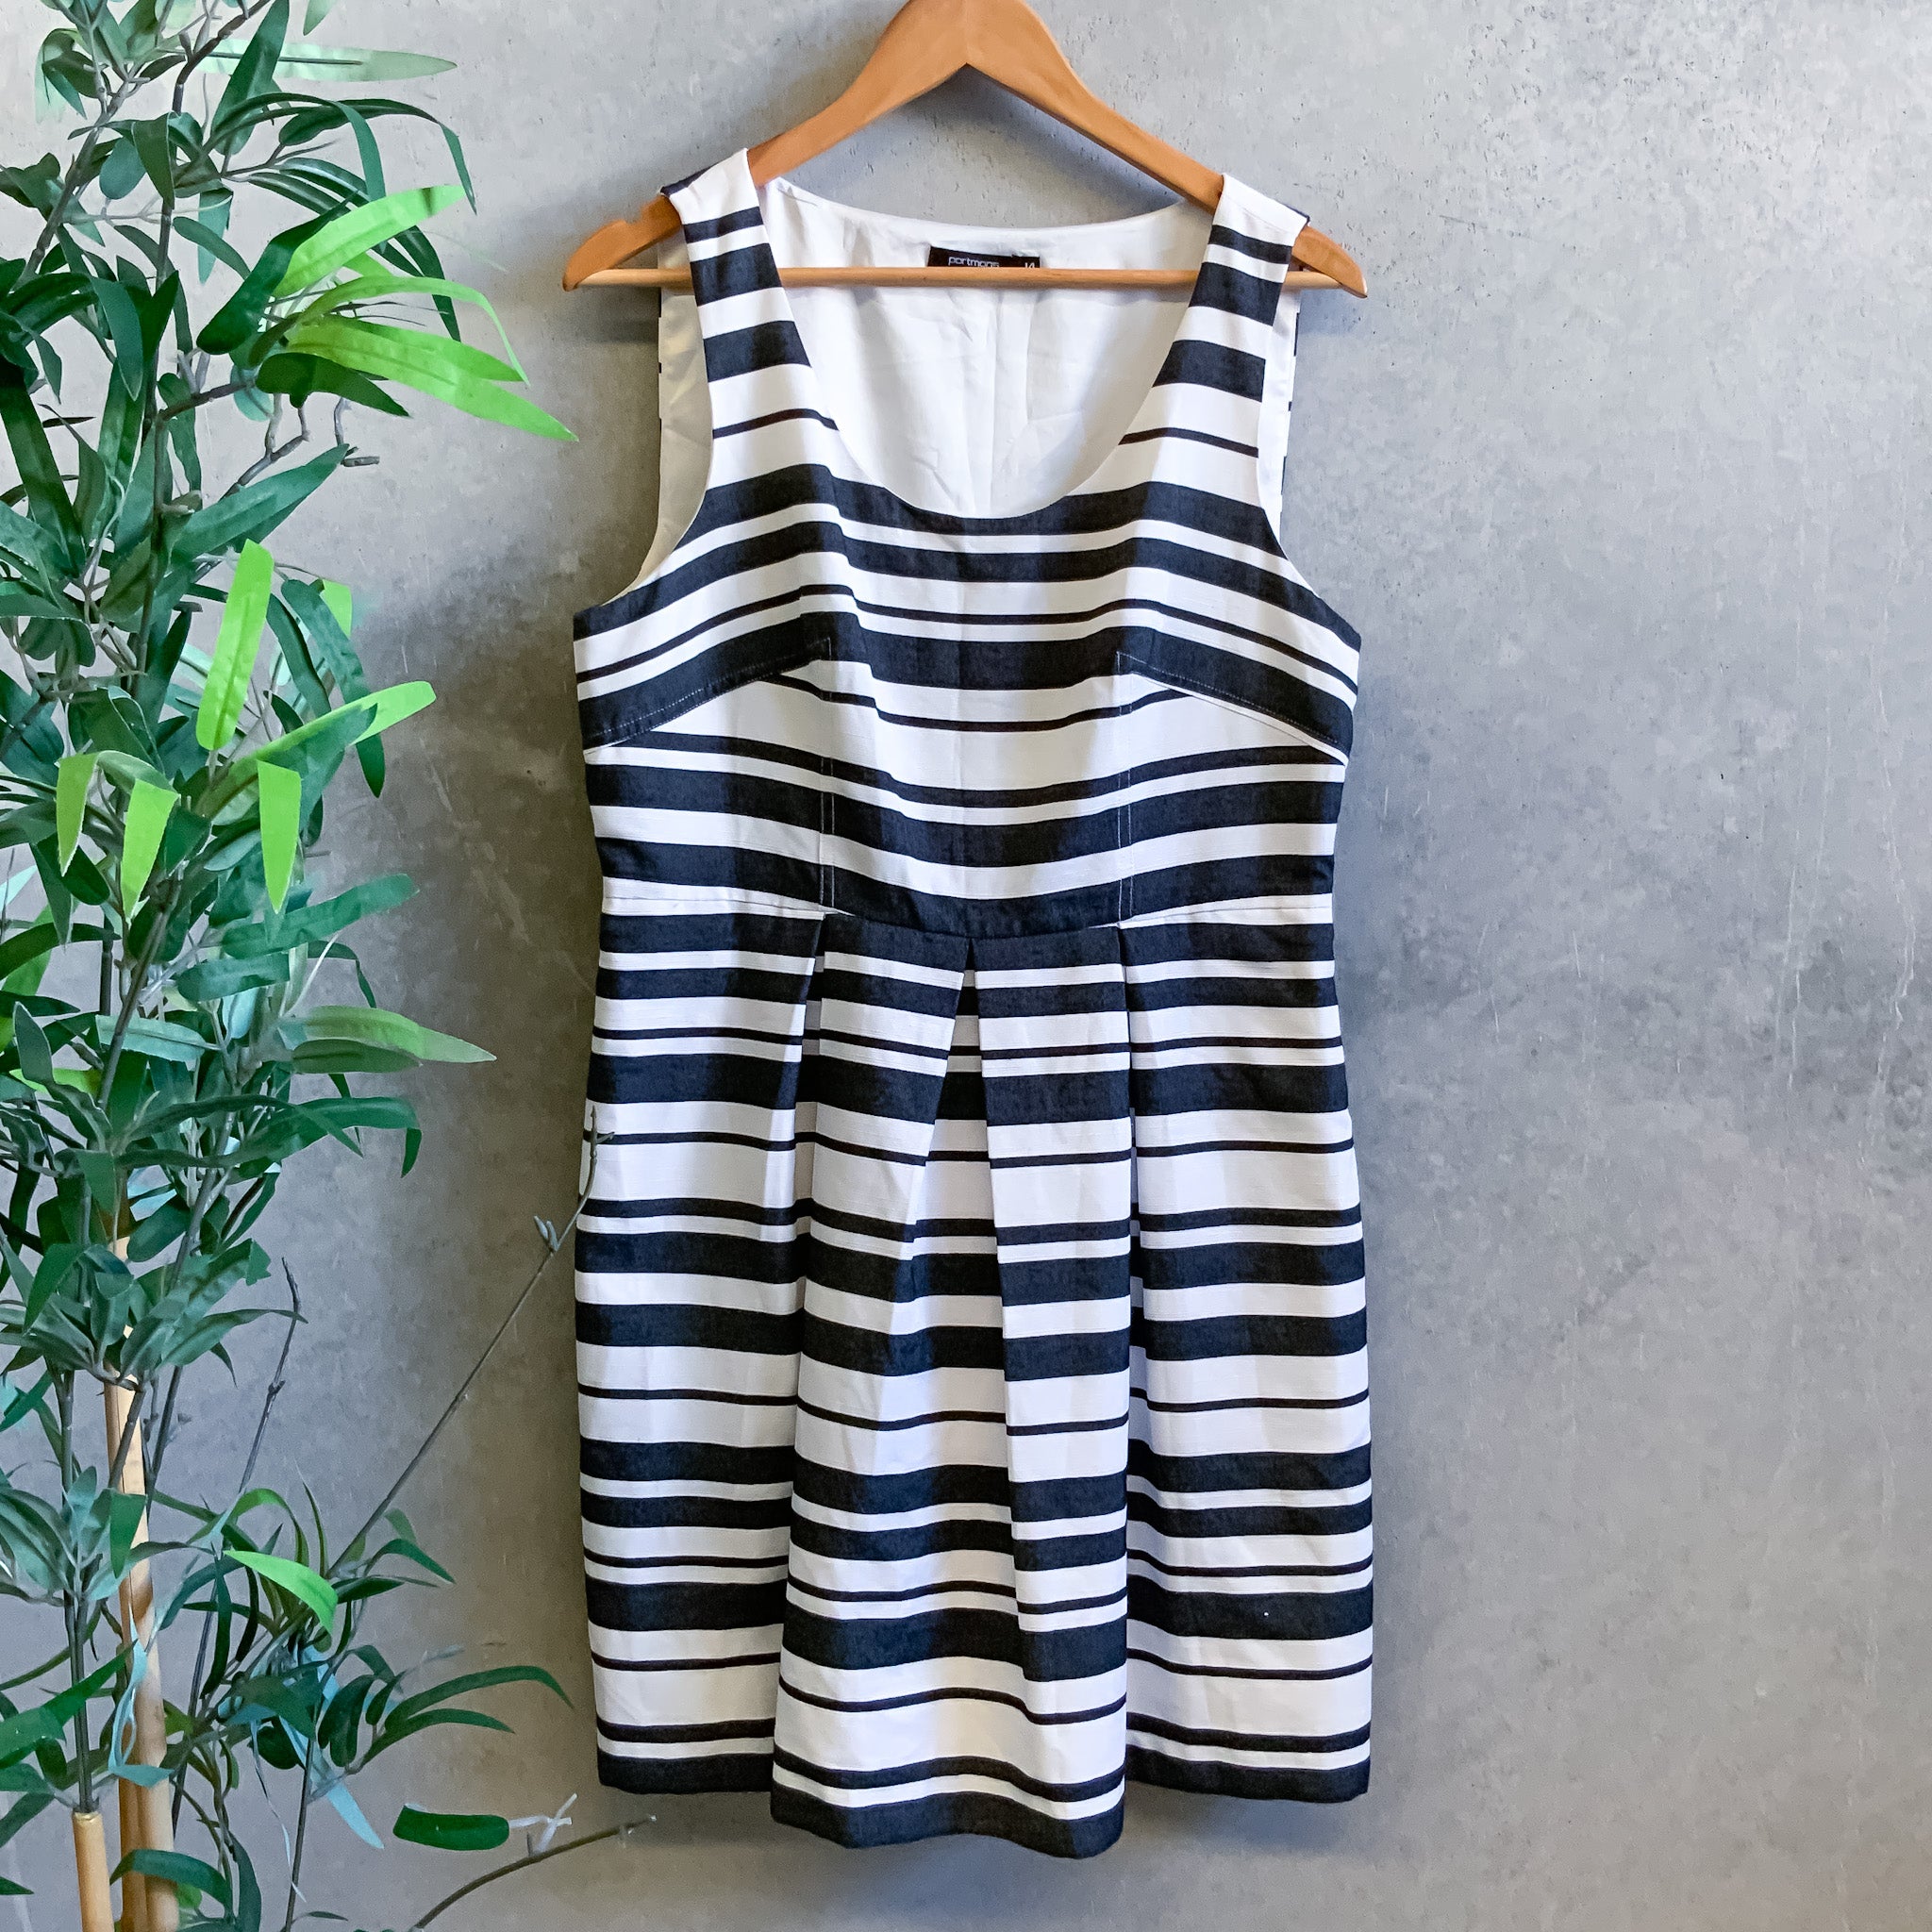 PORTMANS Black & White Striped Pleated Fit & Flare Work/Party Dress - Size 14